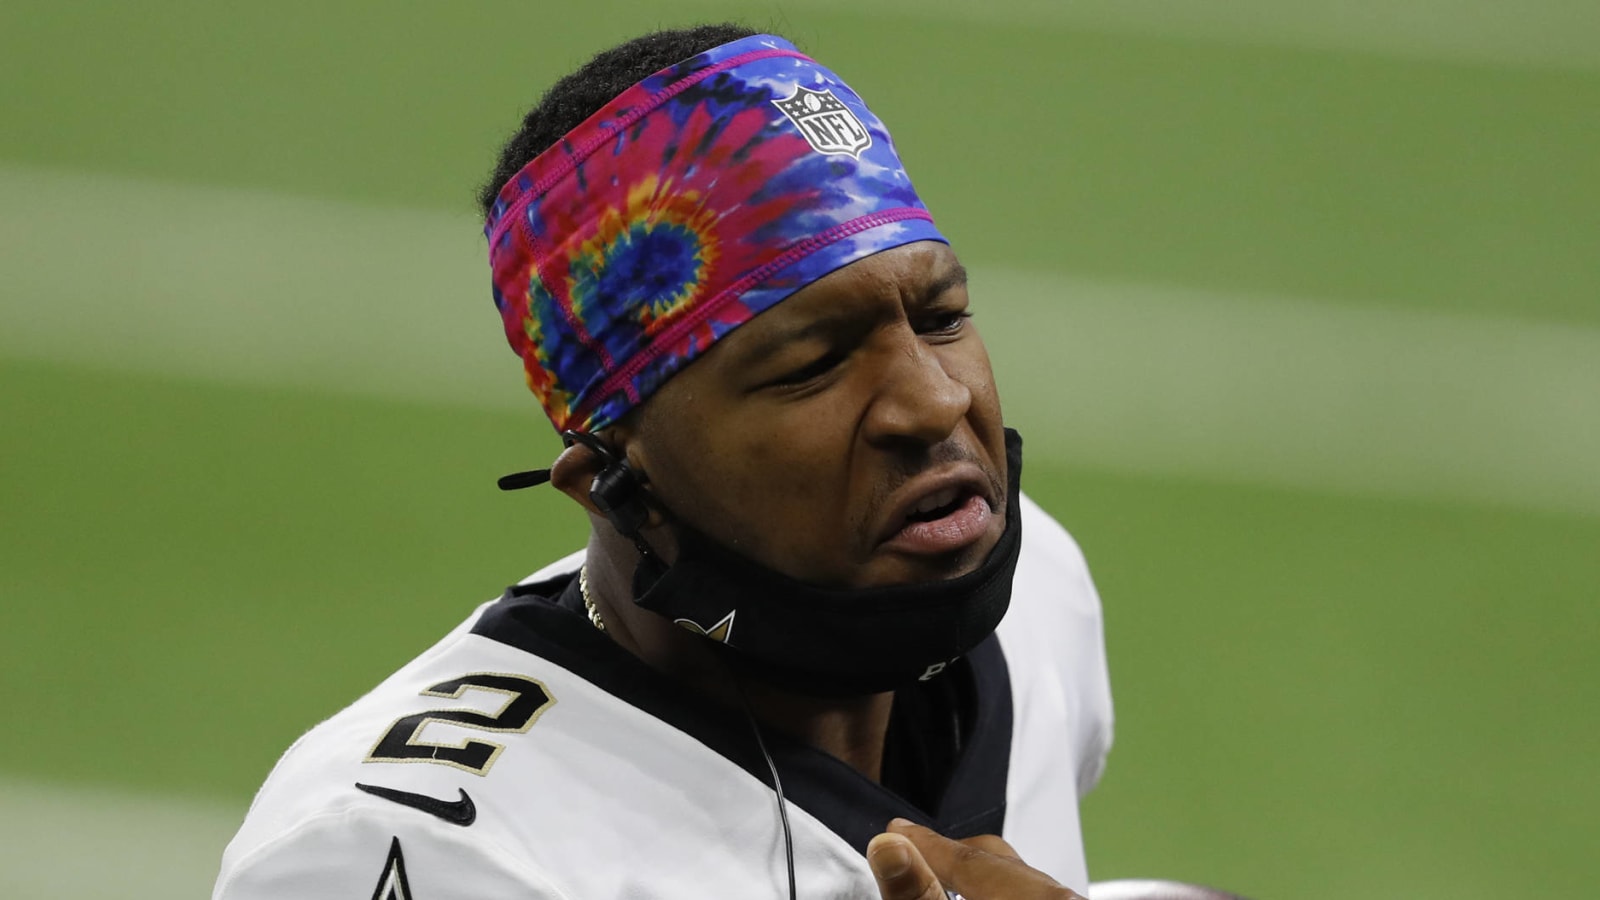 Jameis Winston's weirdly funny warm-up routine going viral